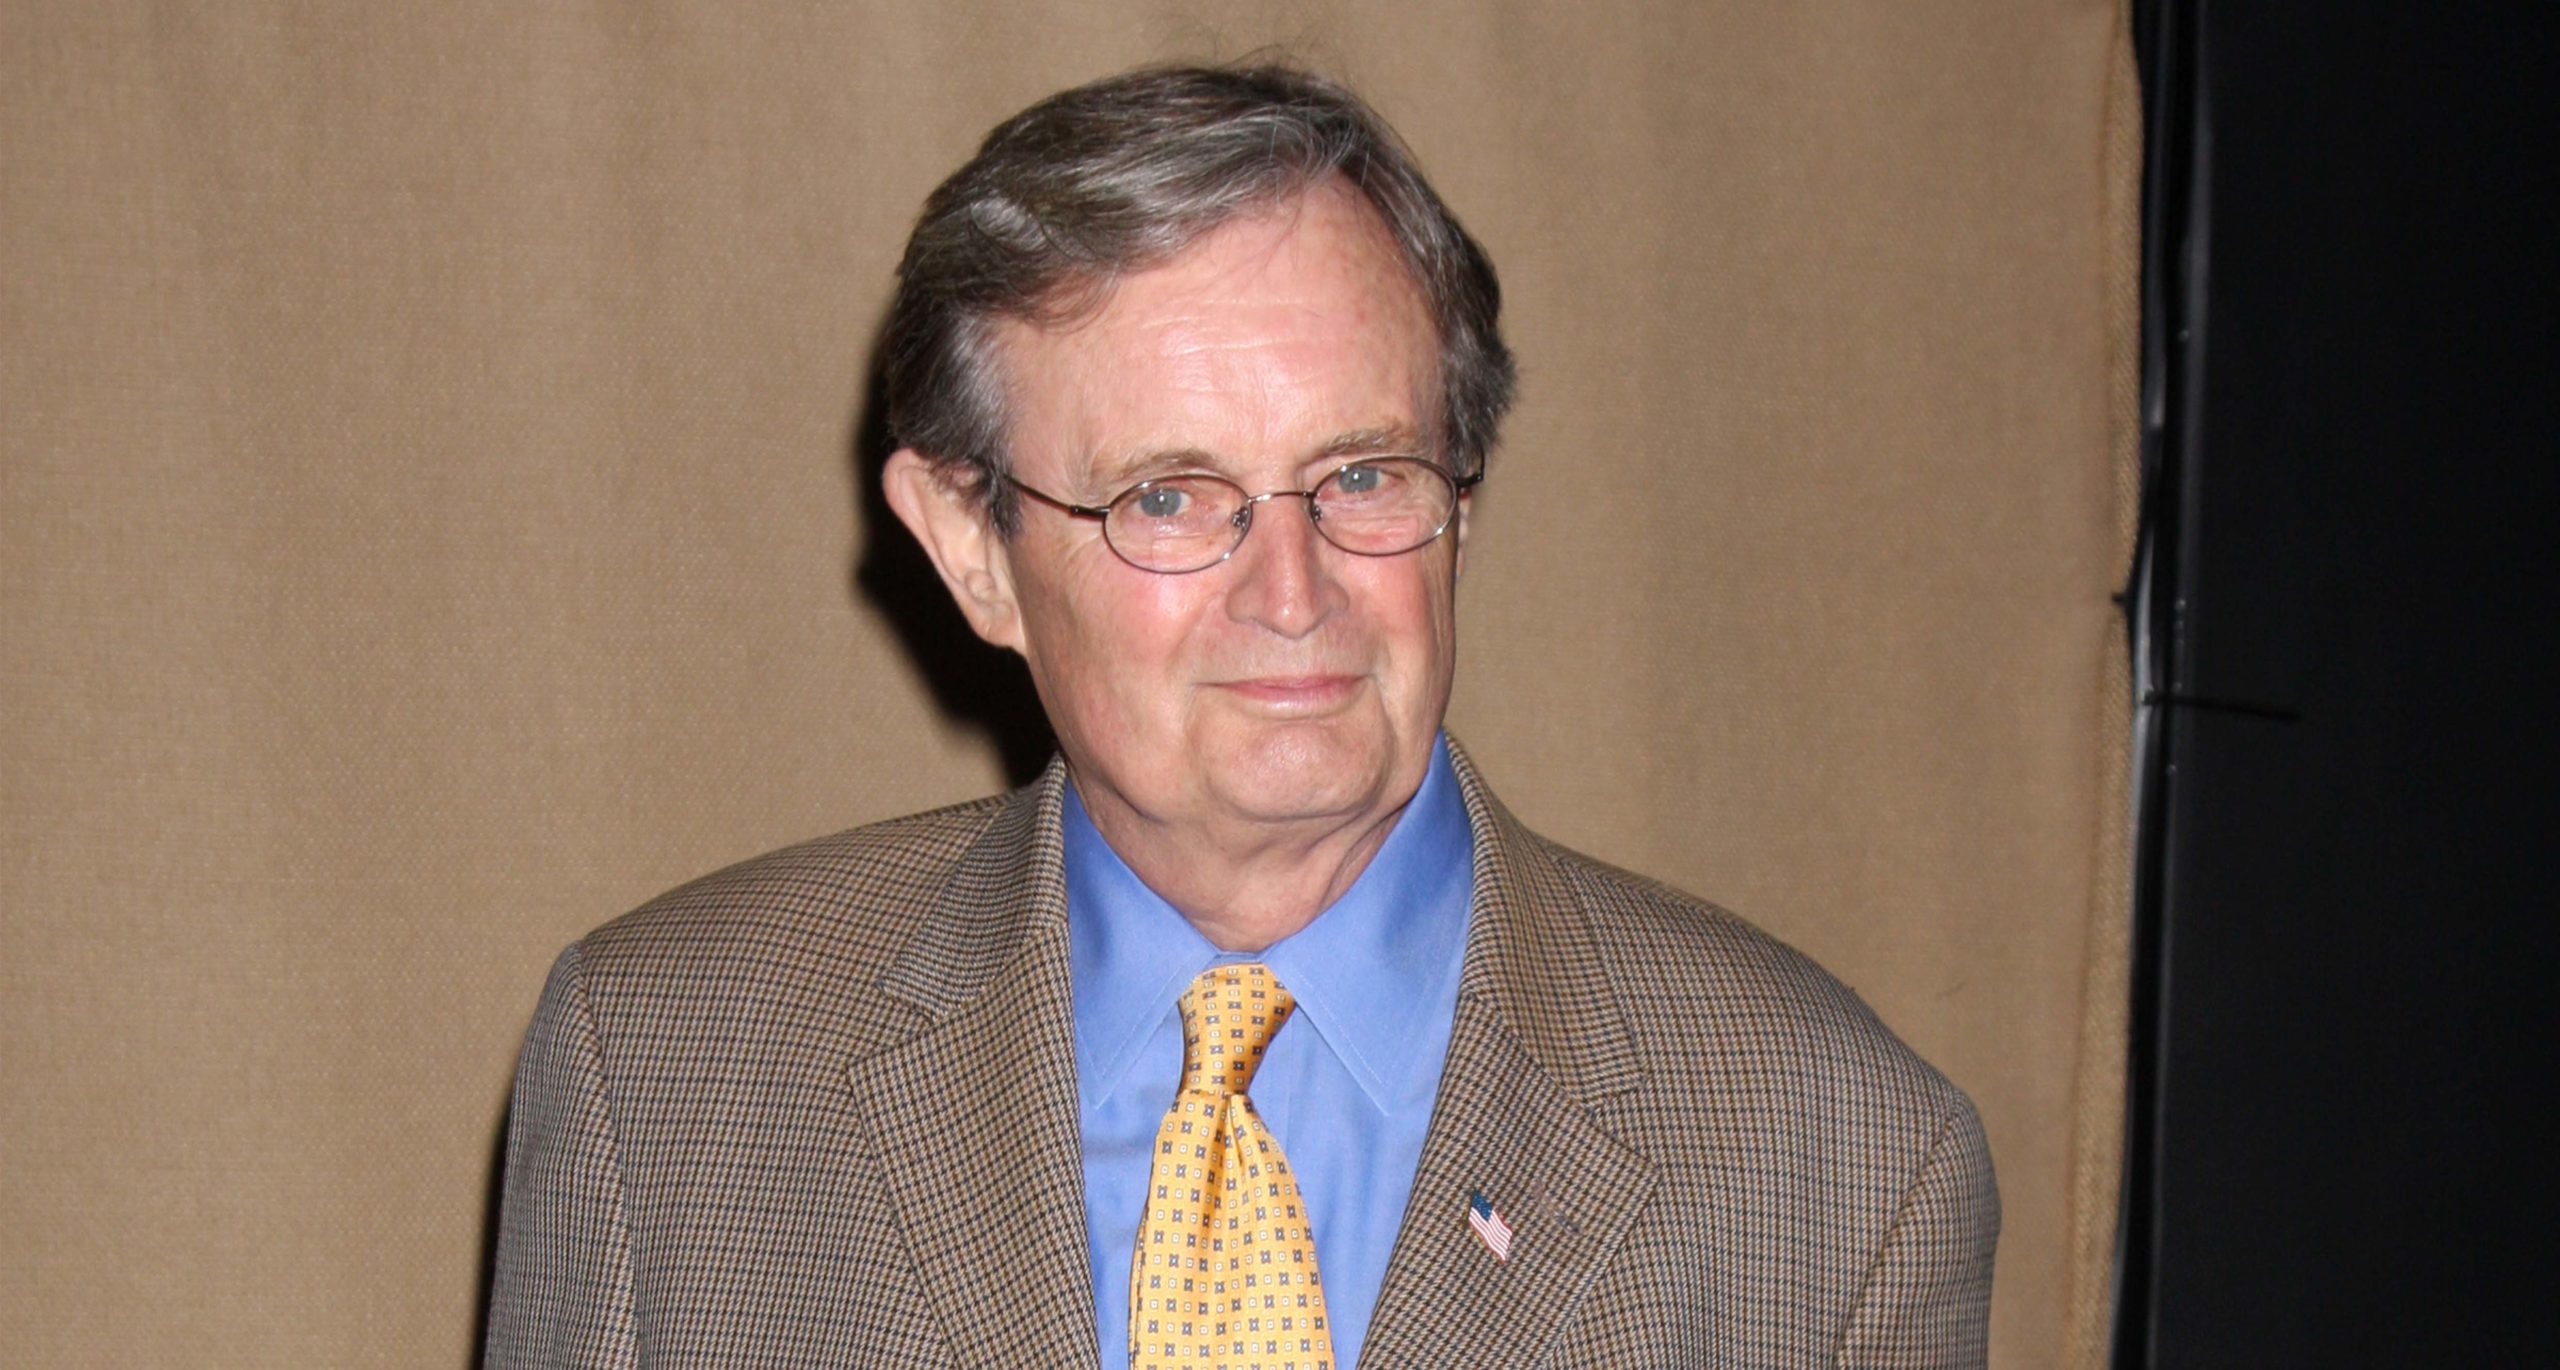 The truth behind how David McCallum was cast to NCIS confirms what we ...